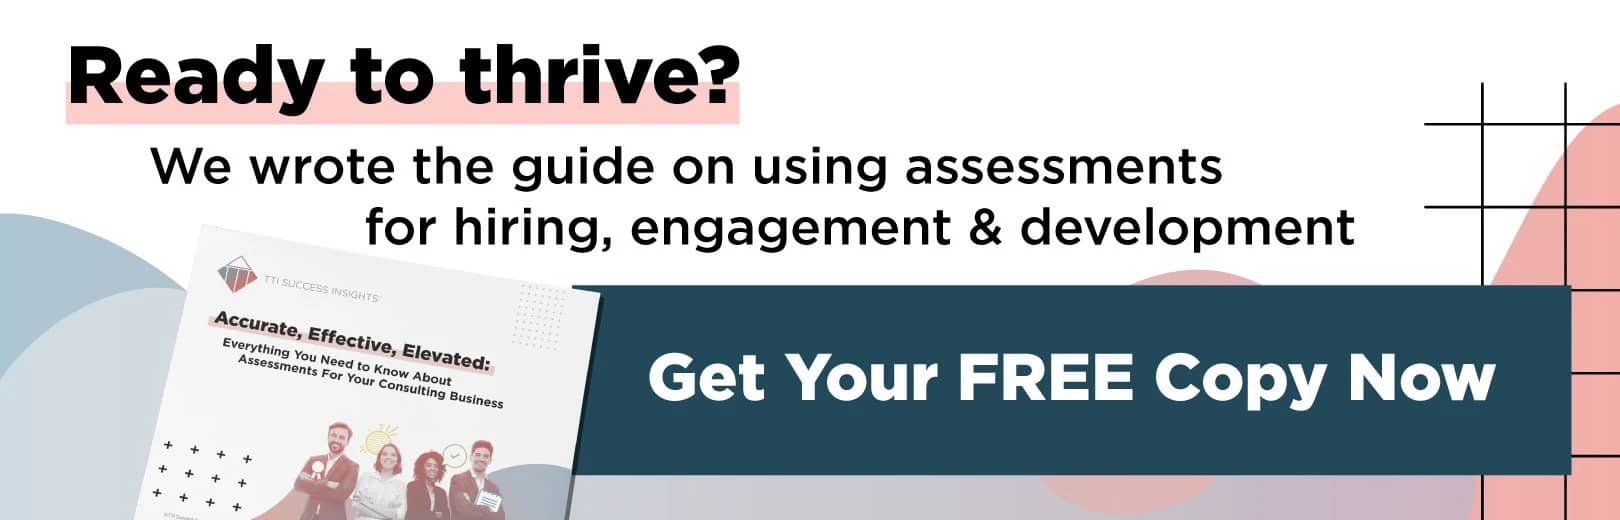 Ready to thrive? We wrote the guide on using assessments for hiring, engagement and development. Get Your FREE Copy Now